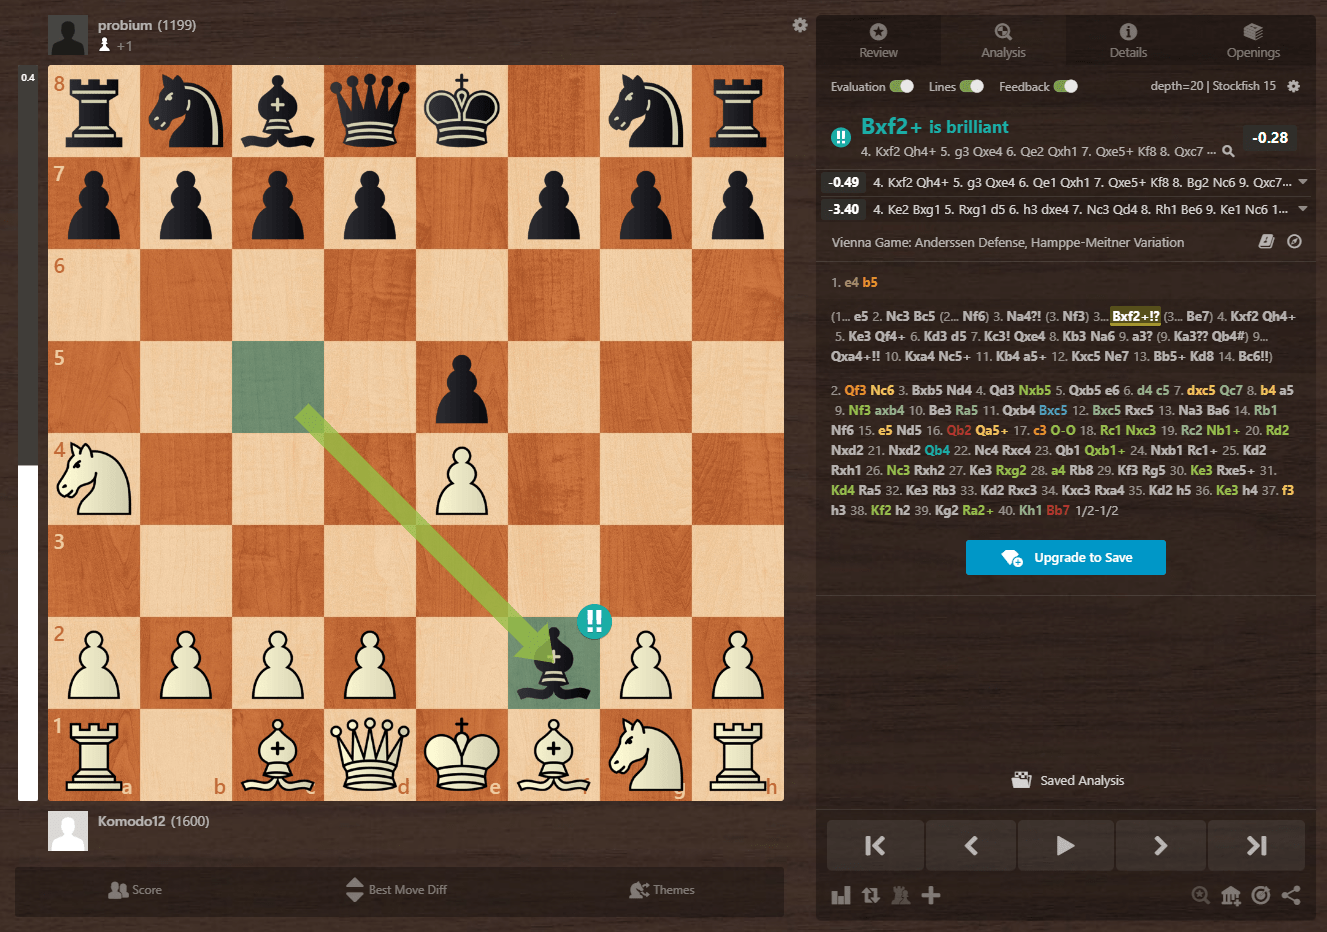 What makes this a brilliant move? I was attempting to counter my